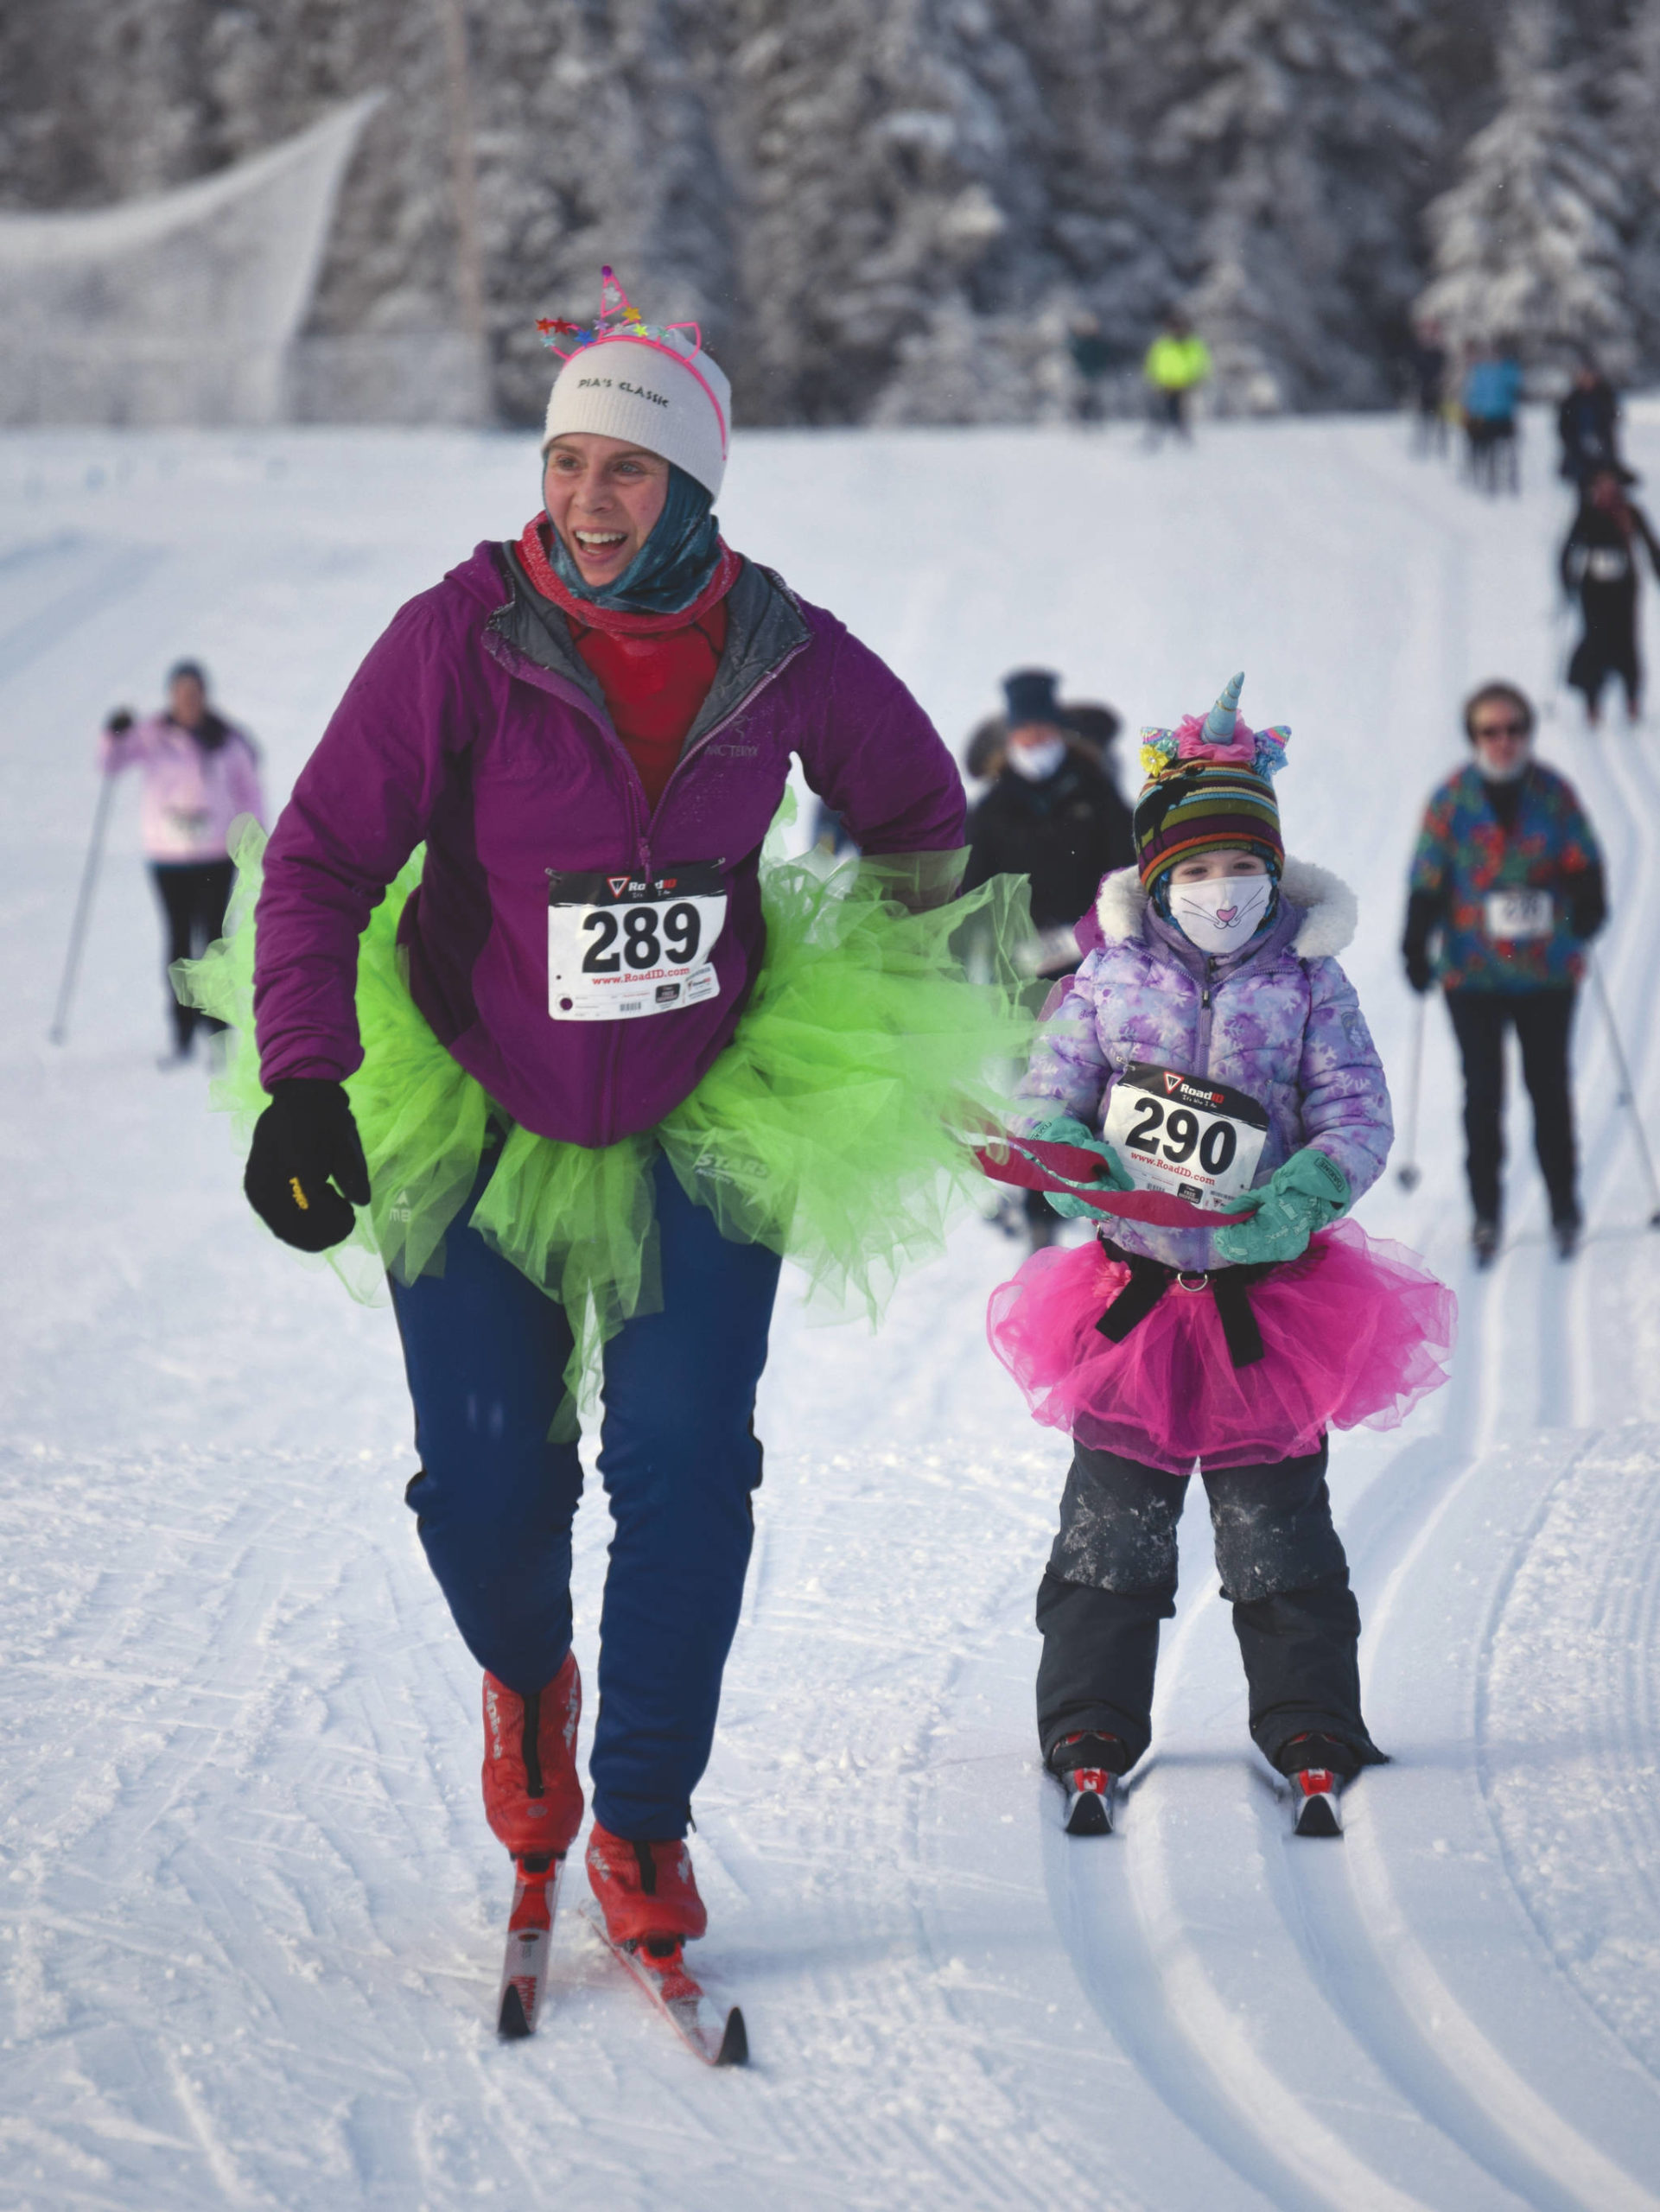 Carly Reimer tows daughter, Lois, at the 17th Ski for Women on Sunday, Feb. 7, 2021, at Tsalteshi Trails just outside of Soldotna, Alaska. (Photo by Jeff Helminiak/Peninsula Clarion)